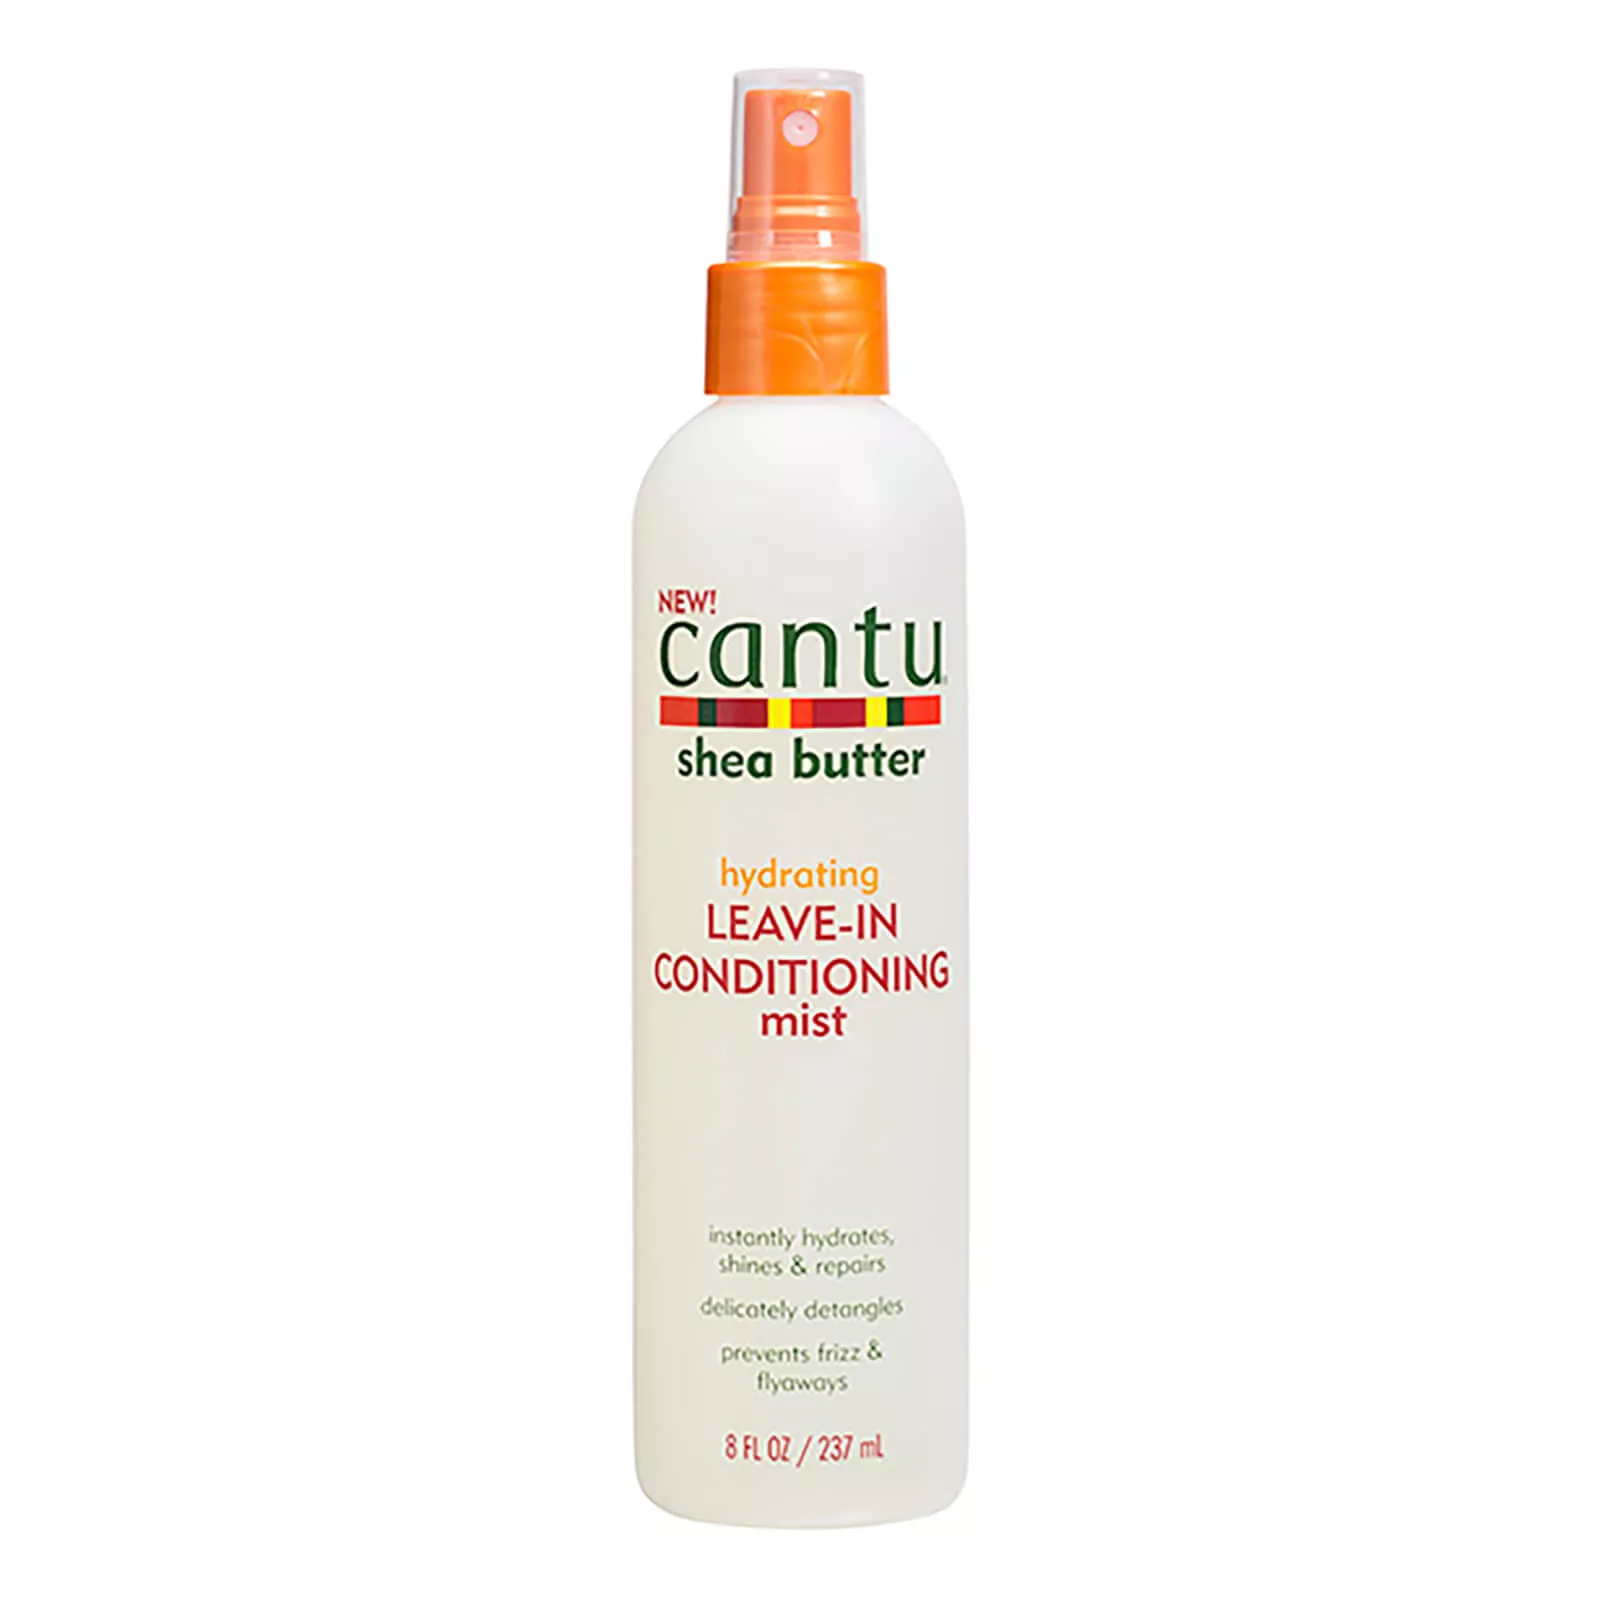 Cantu Hydrating Leave-in Conditioning Mist